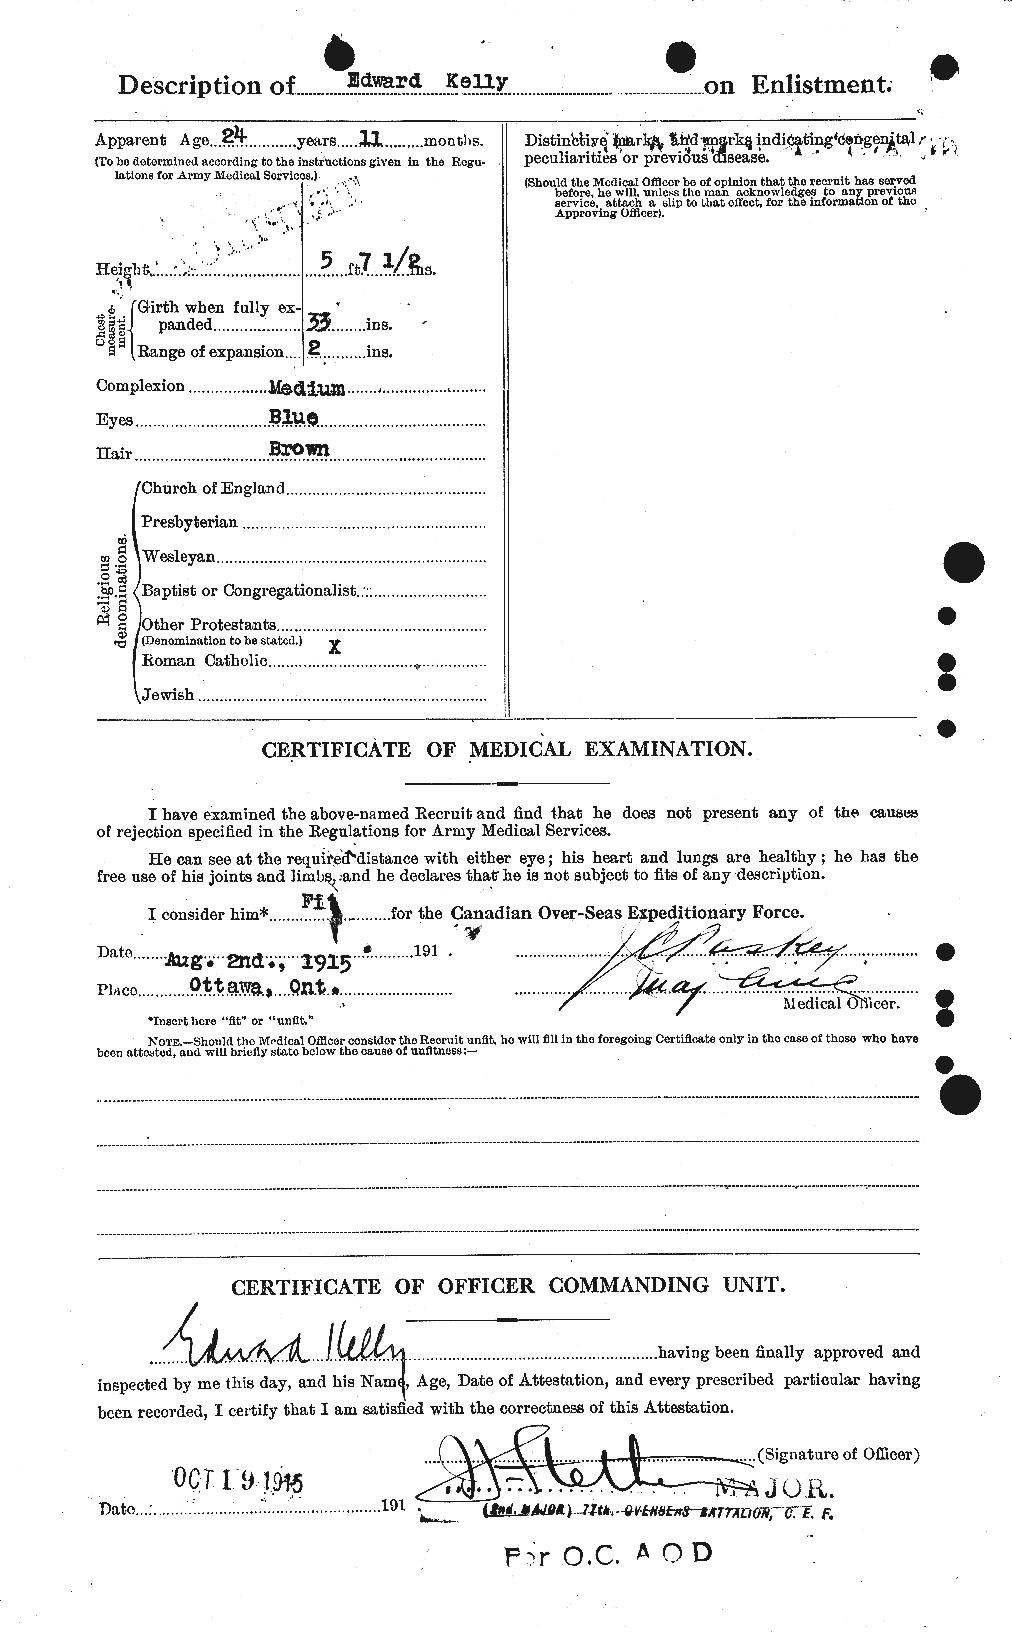 Personnel Records of the First World War - CEF 431334b